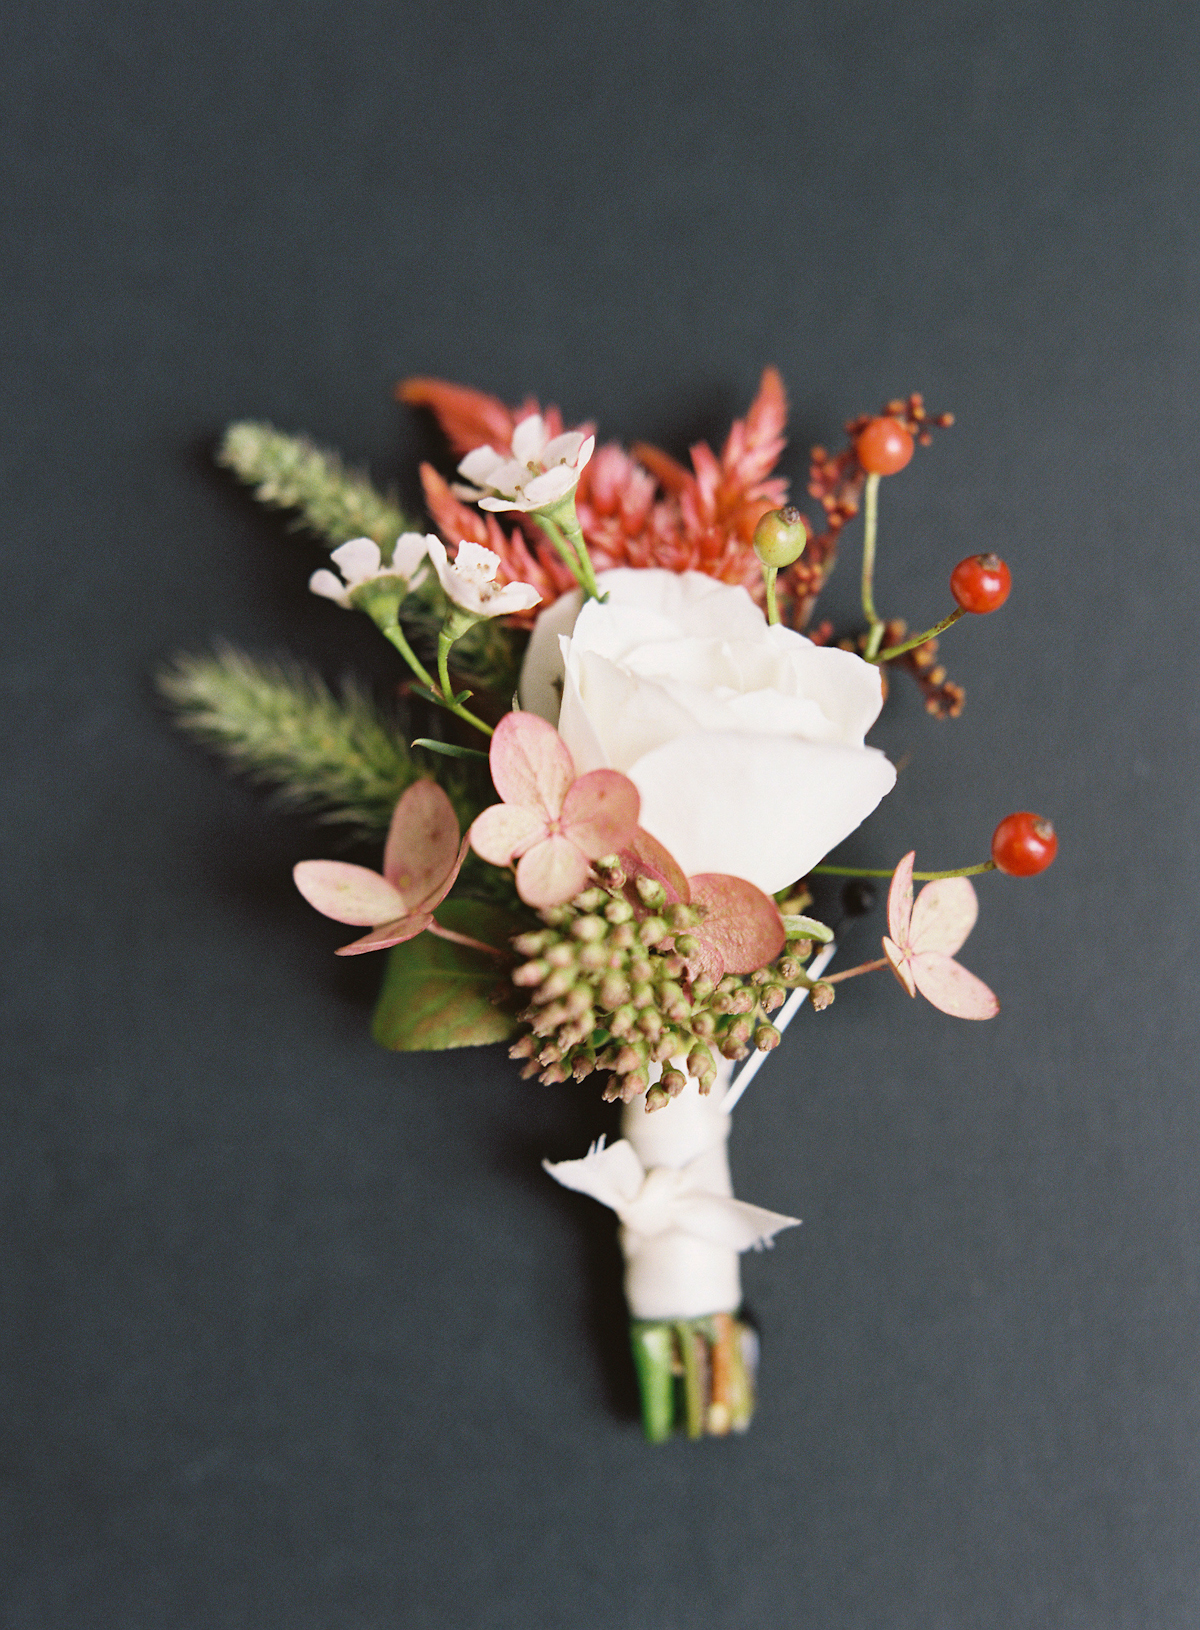 Plaza wedding boutonniere with rose and red berries